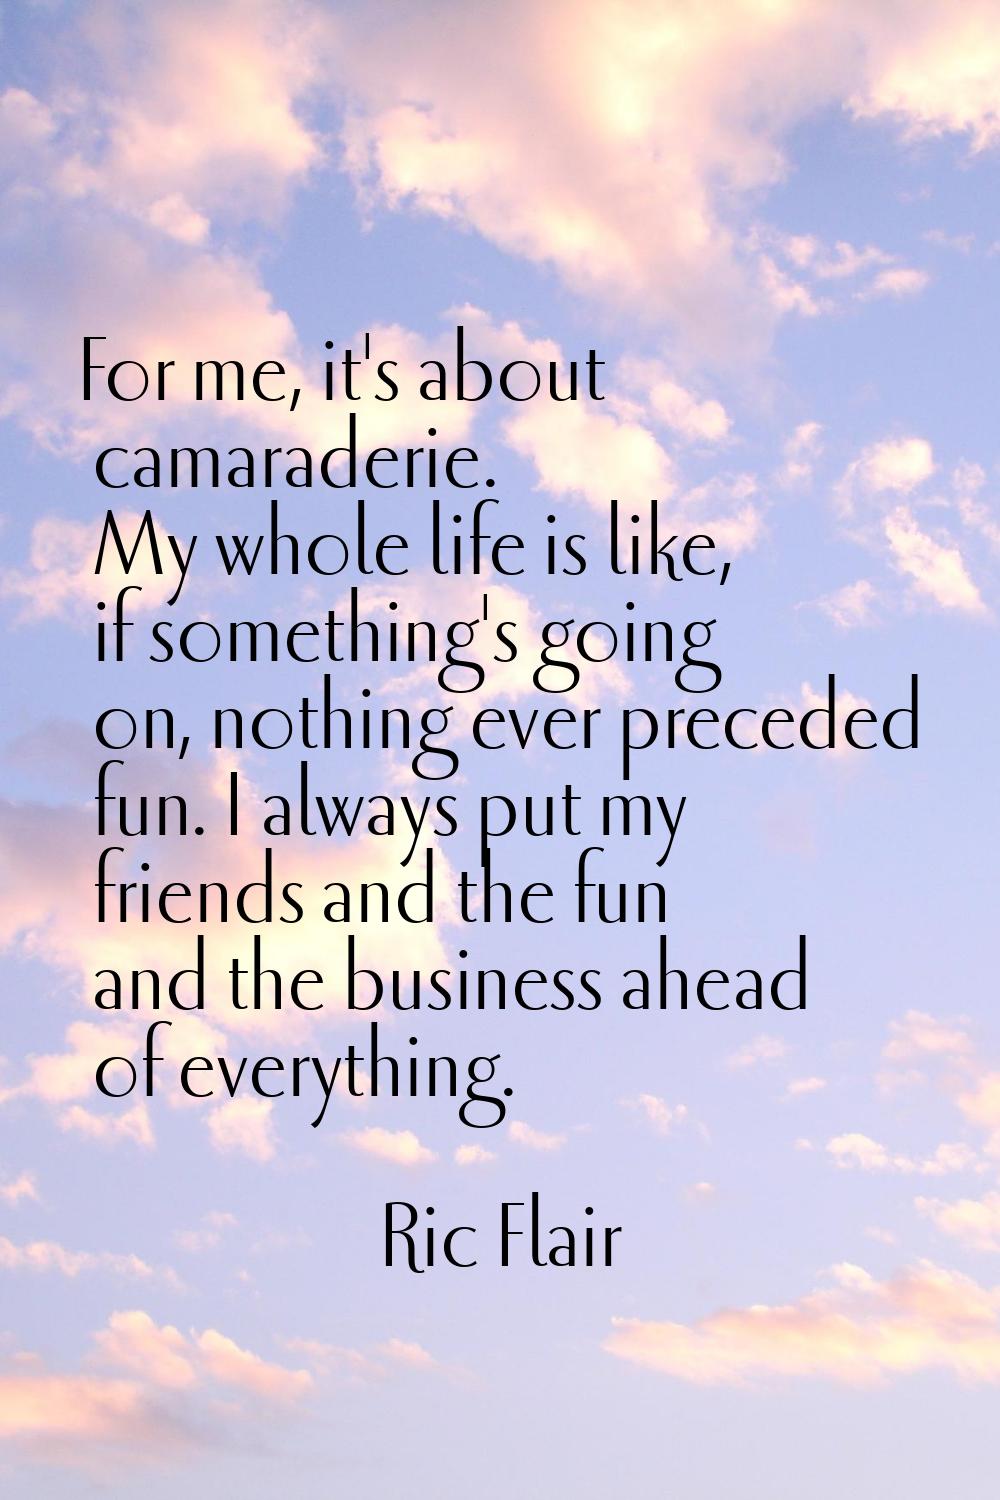 For me, it's about camaraderie. My whole life is like, if something's going on, nothing ever preced